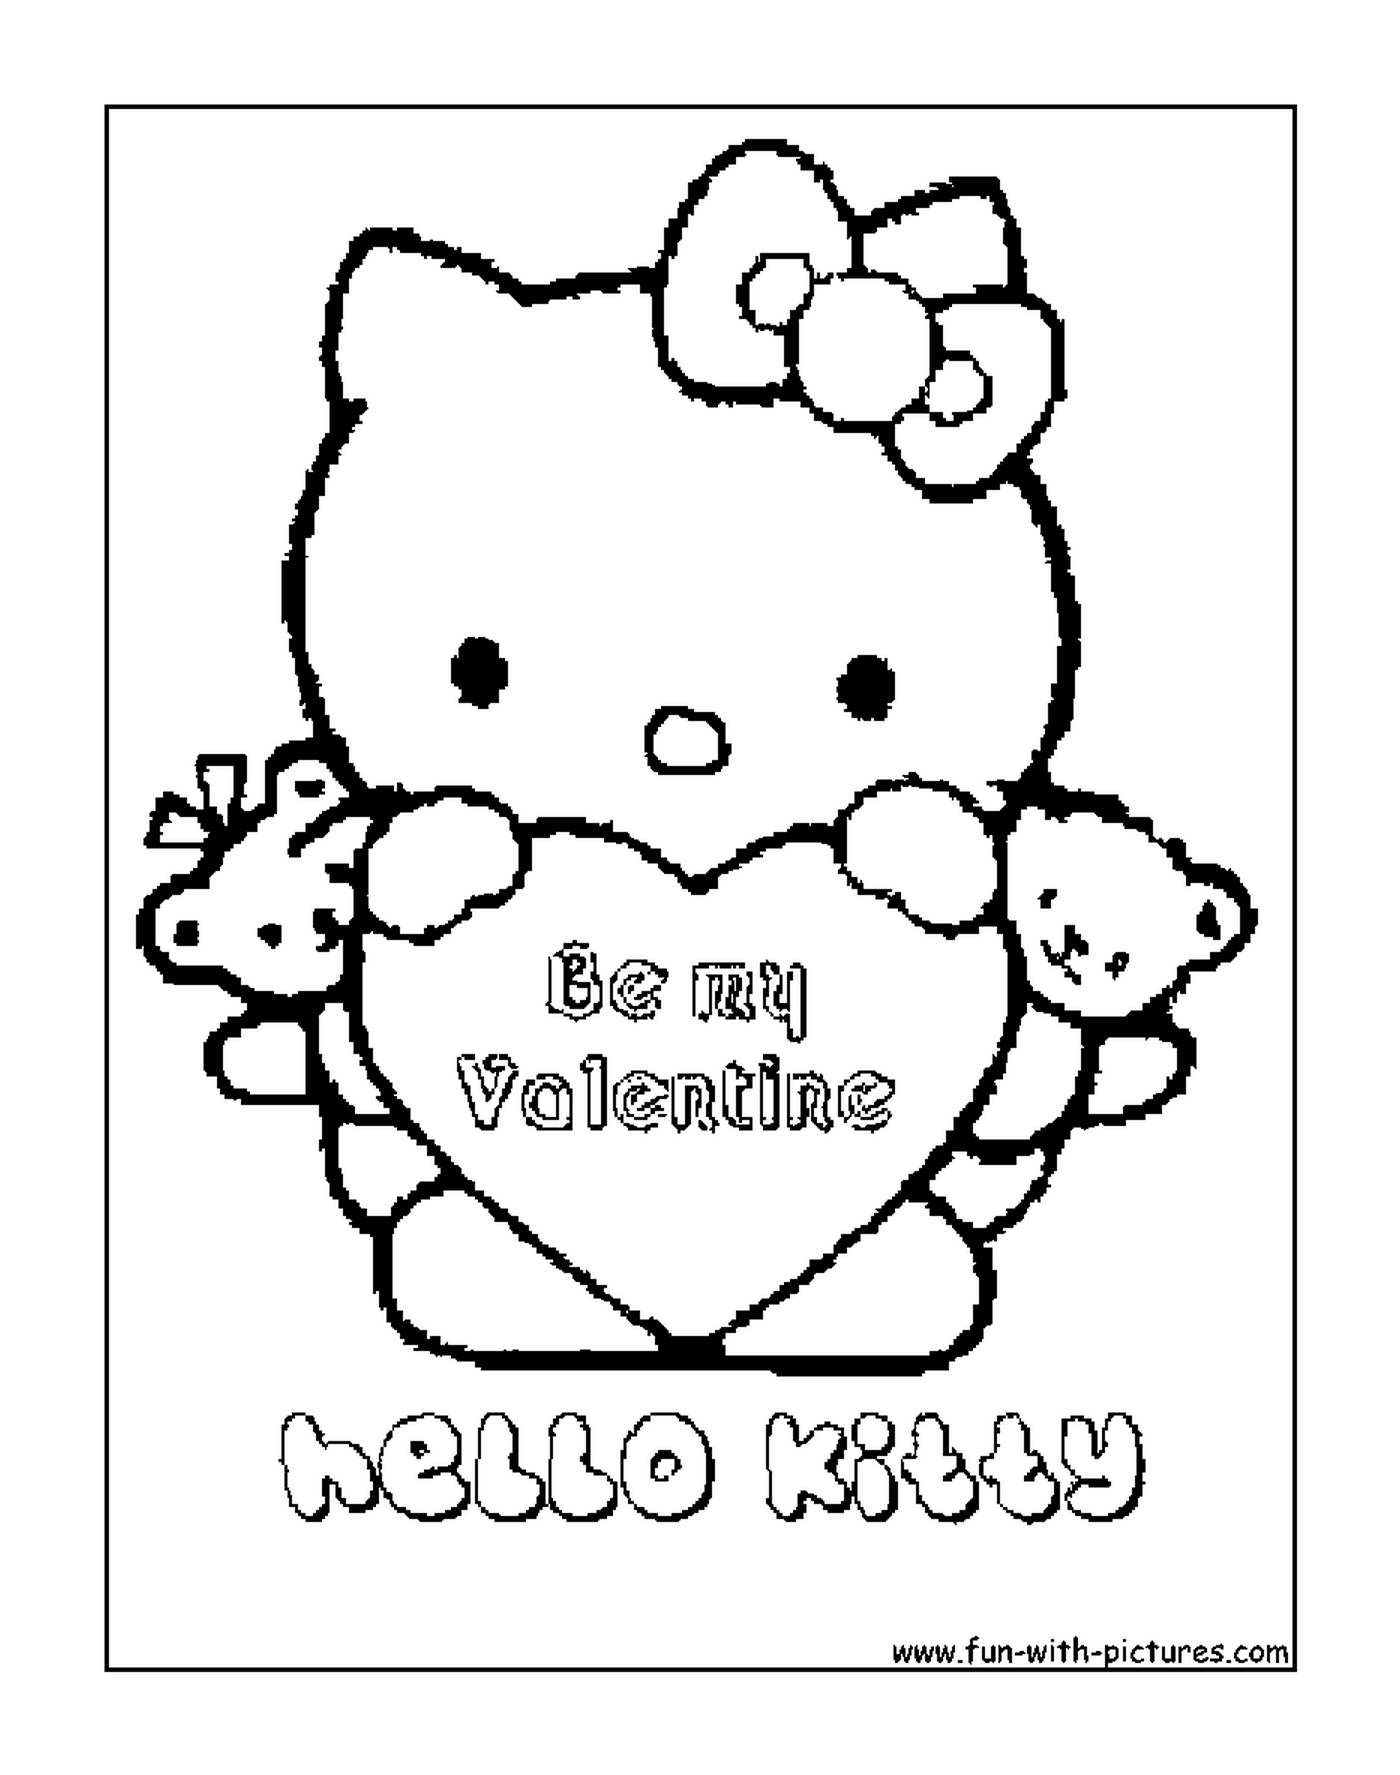  Hello Kitty for Valentine's Day 